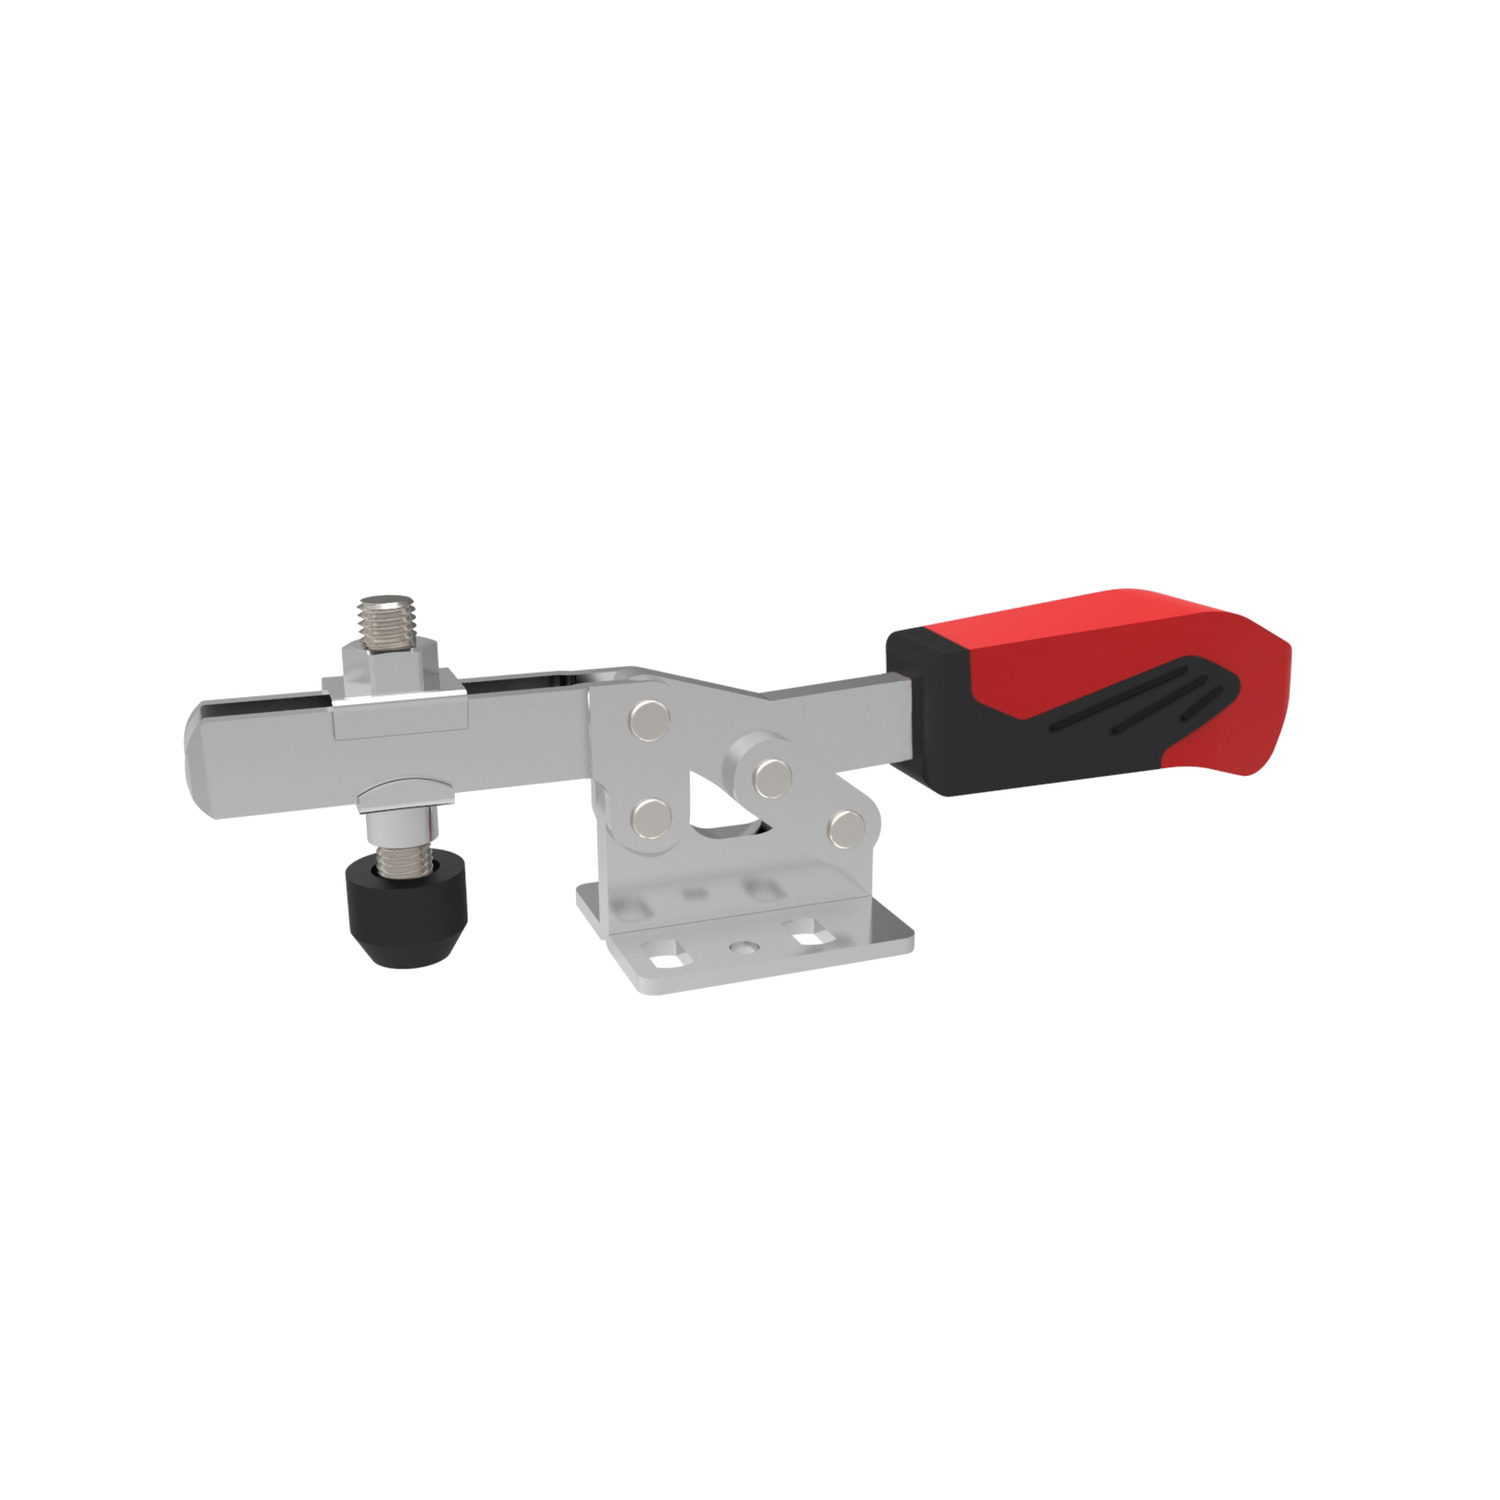 Steel Horizontal Acting Toggle Clamps Our horizontal acting toggle clamps made from zinc-plated and passivated steel or in stainless steel. Bushes are case hardened and greased. Handles are made from oil resistant plastic to ensure easy operation.